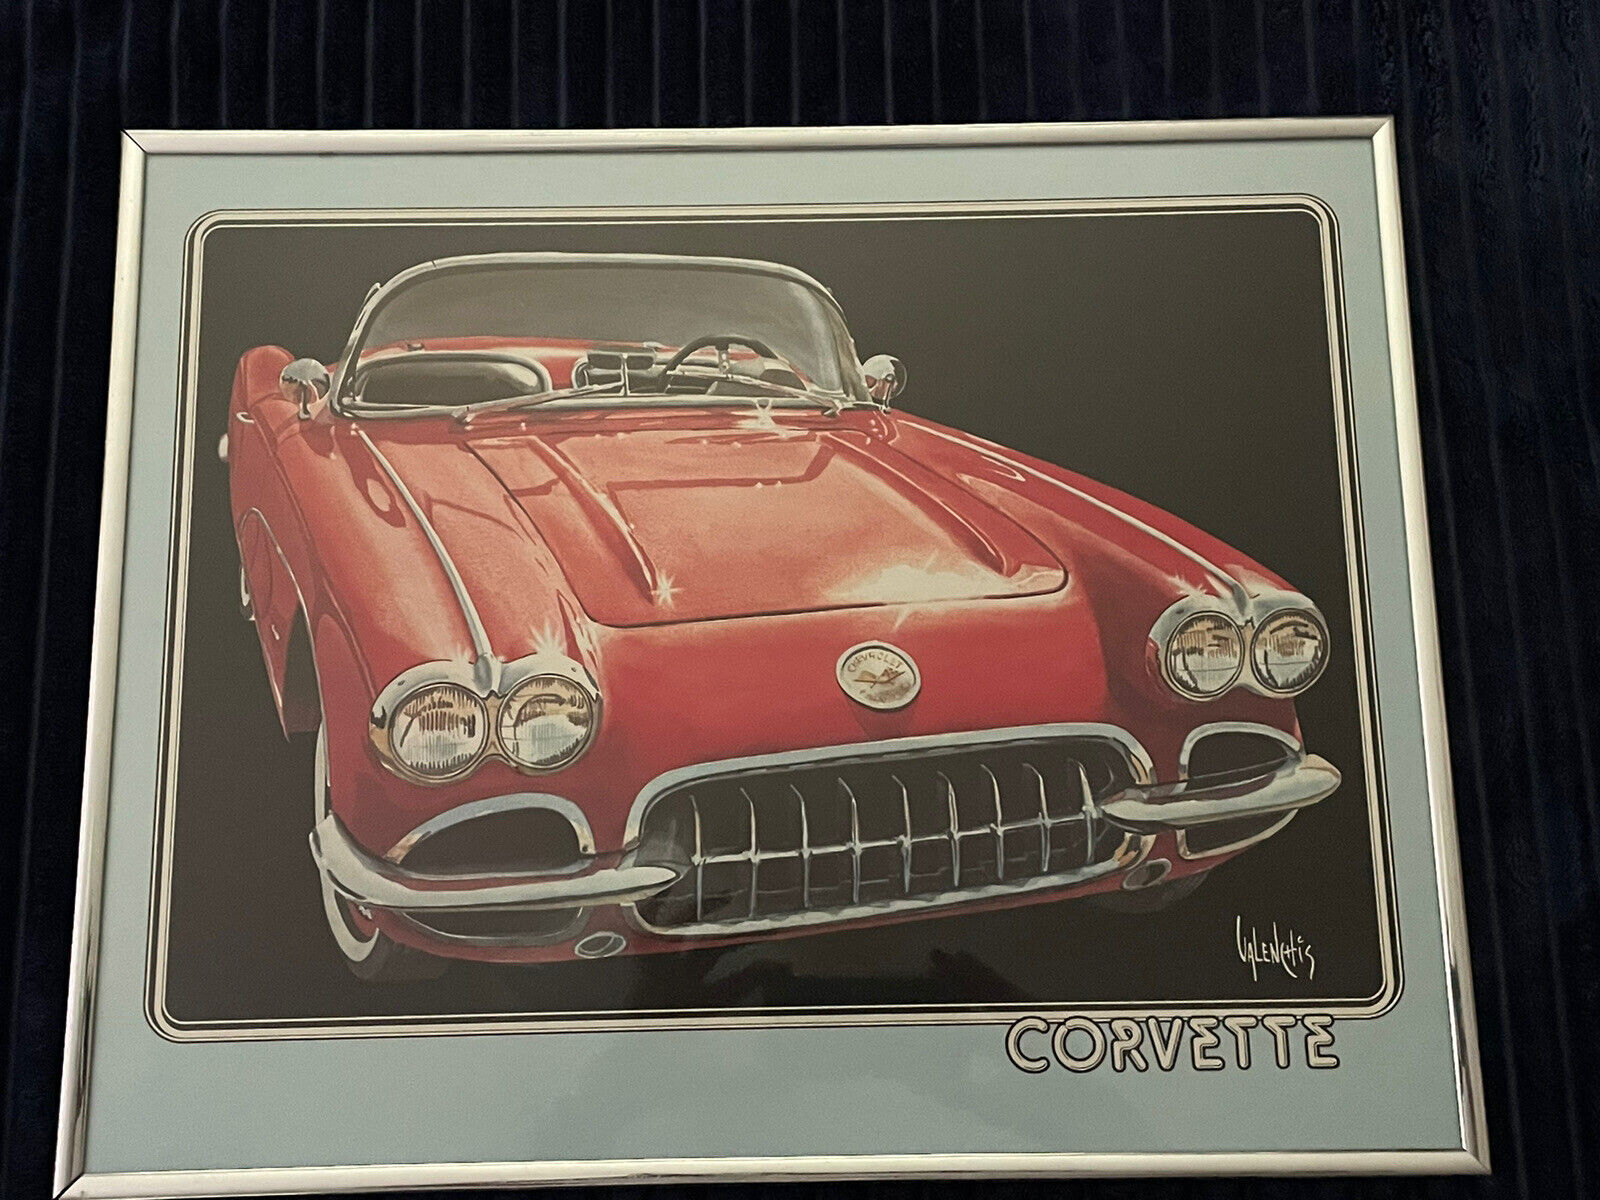 1959 Little Red Corvette by Valenchis , Framed Litho, Vintage Pic Wall Hanging